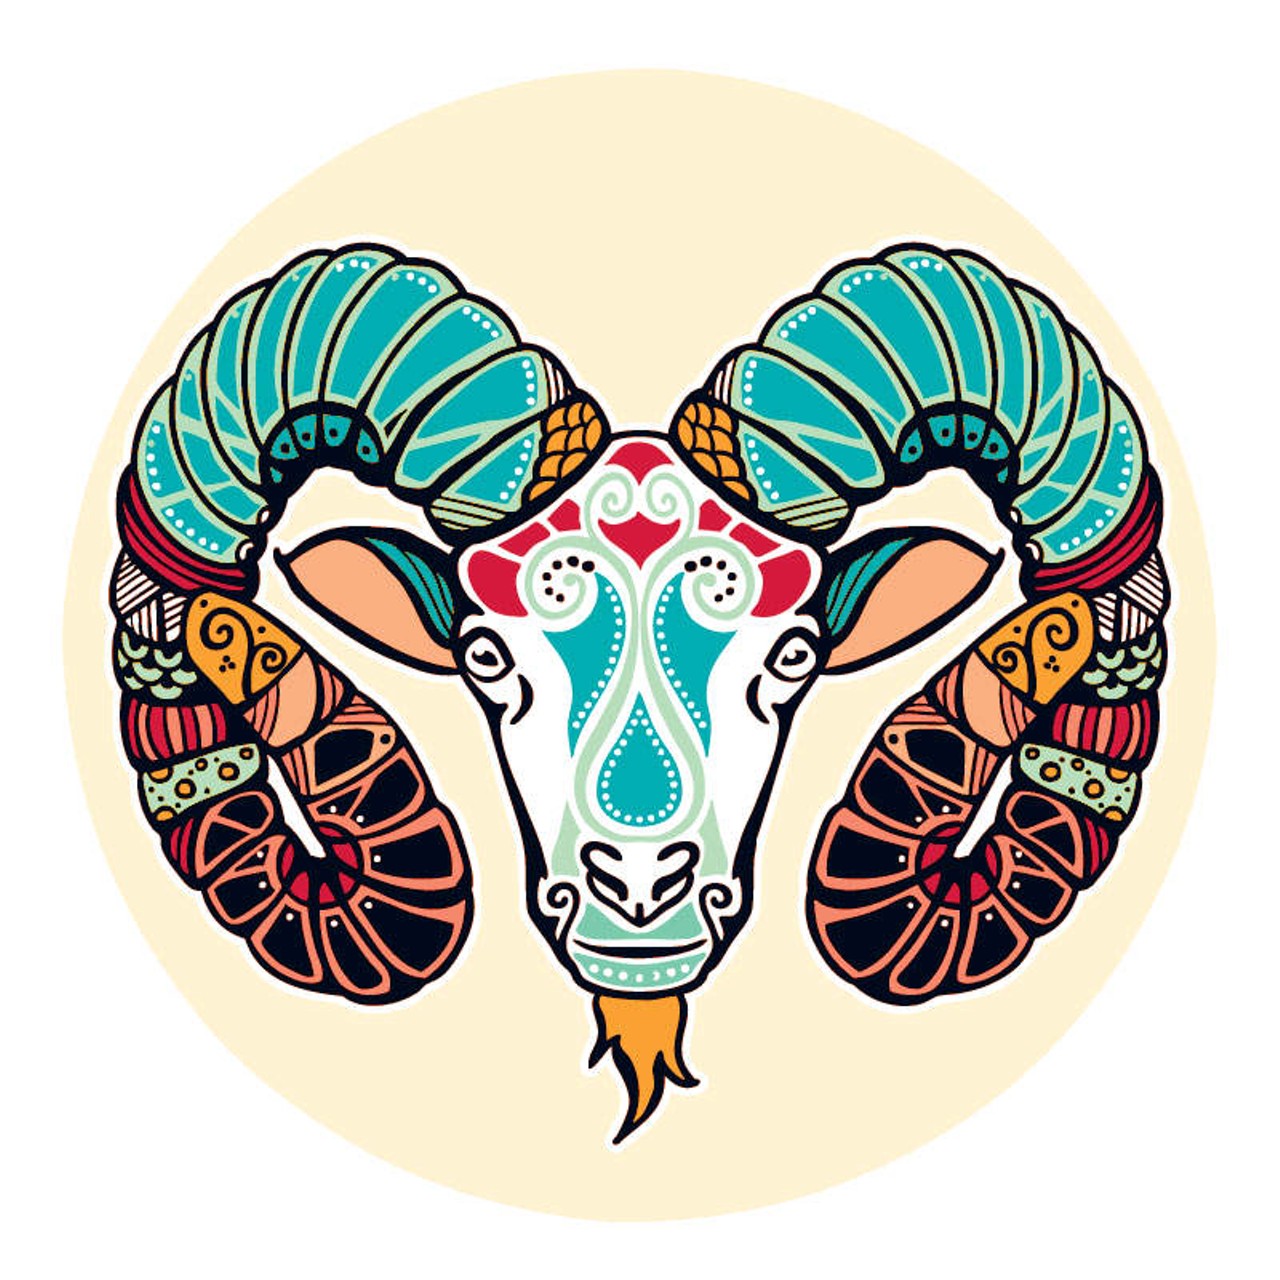 ARIES (March 21- April 20): 
I can&#146;t even begin to break this down. You guys could be going every which way but loose. Reining things in is where it&#146;s at. Knowing exactly how much to push, and how much to hold back, and being wise enough to navigate people and their issues without screwing things up could be making you nuts. When life gets like this it helps to remind yourself that everything is in God&#146;s hands and all of it happens in spite of us, not because of us. You are one strong cookie. What happens next will require enough strength to know exactly when to haul back and go with the flow.